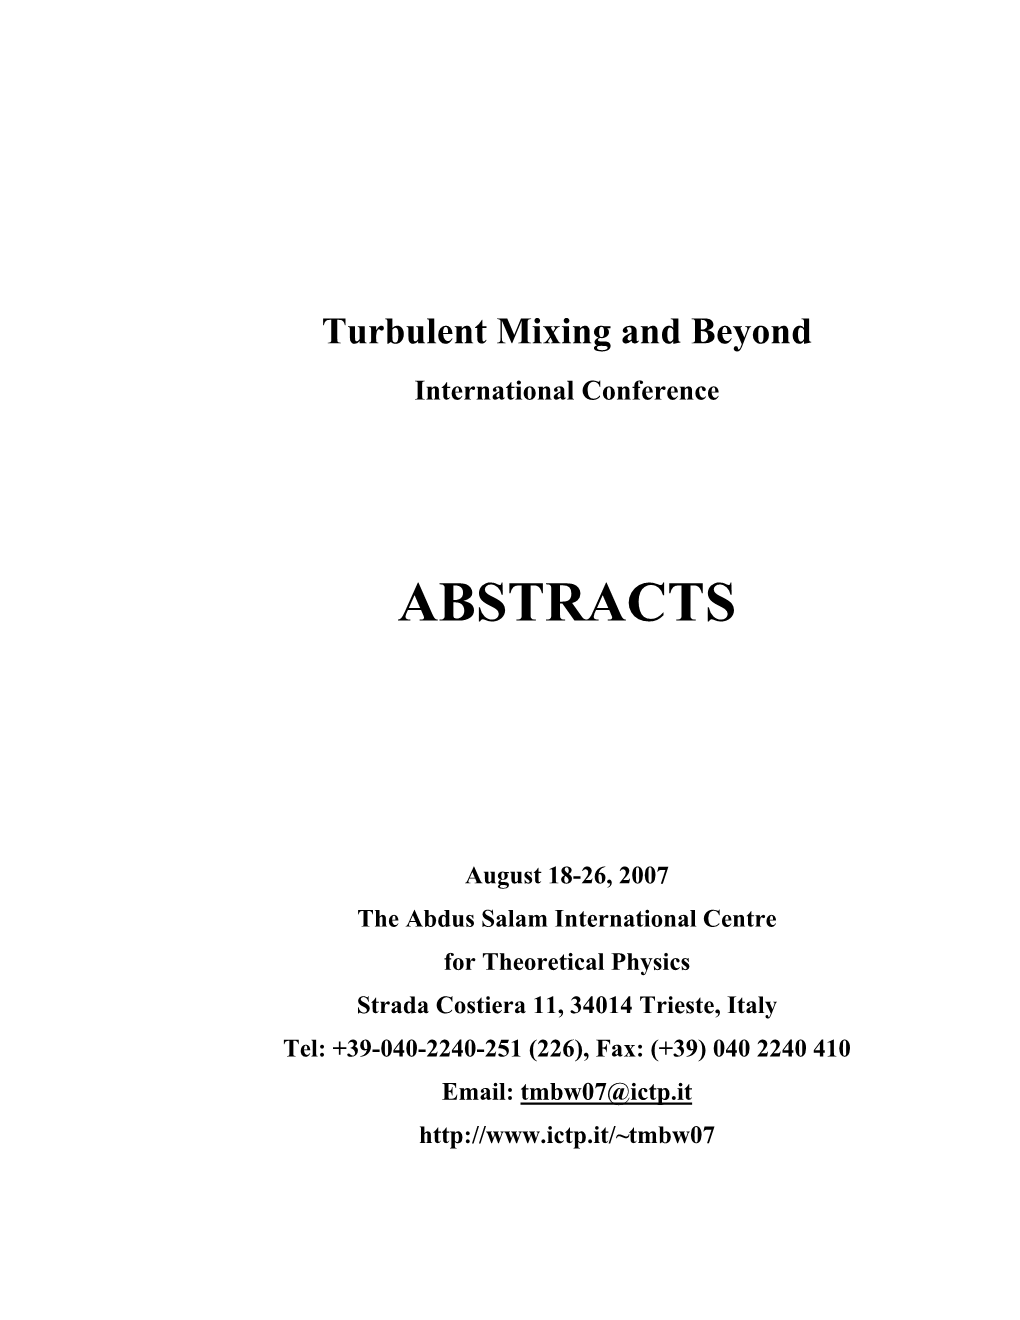 TMB-2007 Book of Abstracts